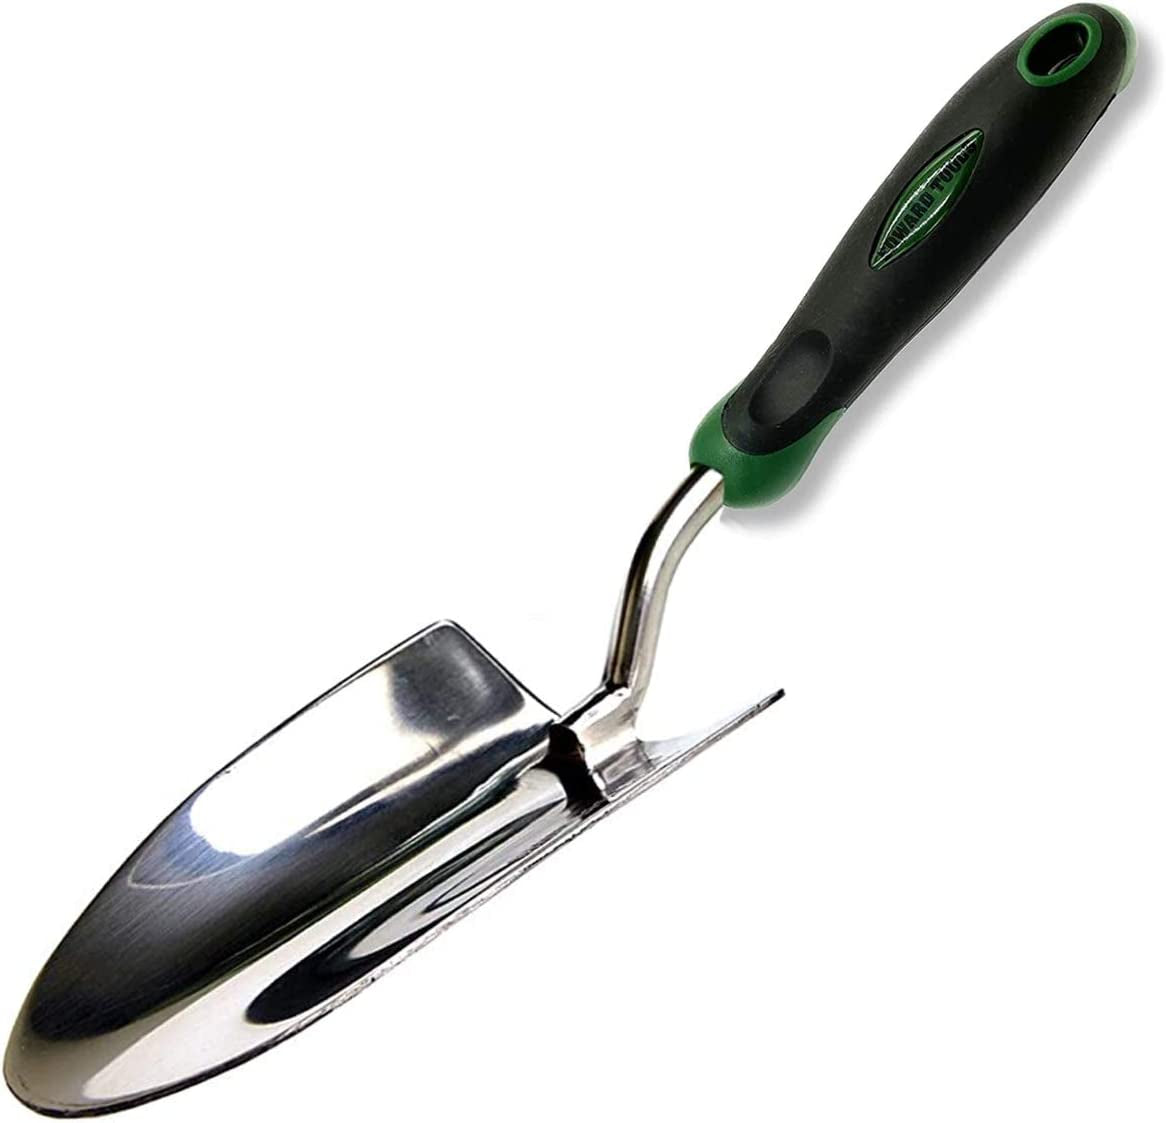 Edward Tools, Edward Tools Bend-Proof Garden Trowel - Heavy Duty Polished Stainless Steel - Rust Resistant Oversized Garden Hand Shovel for Quicker Work - Digs through Rocky / Heavy Soils - Comfort Grip (1)